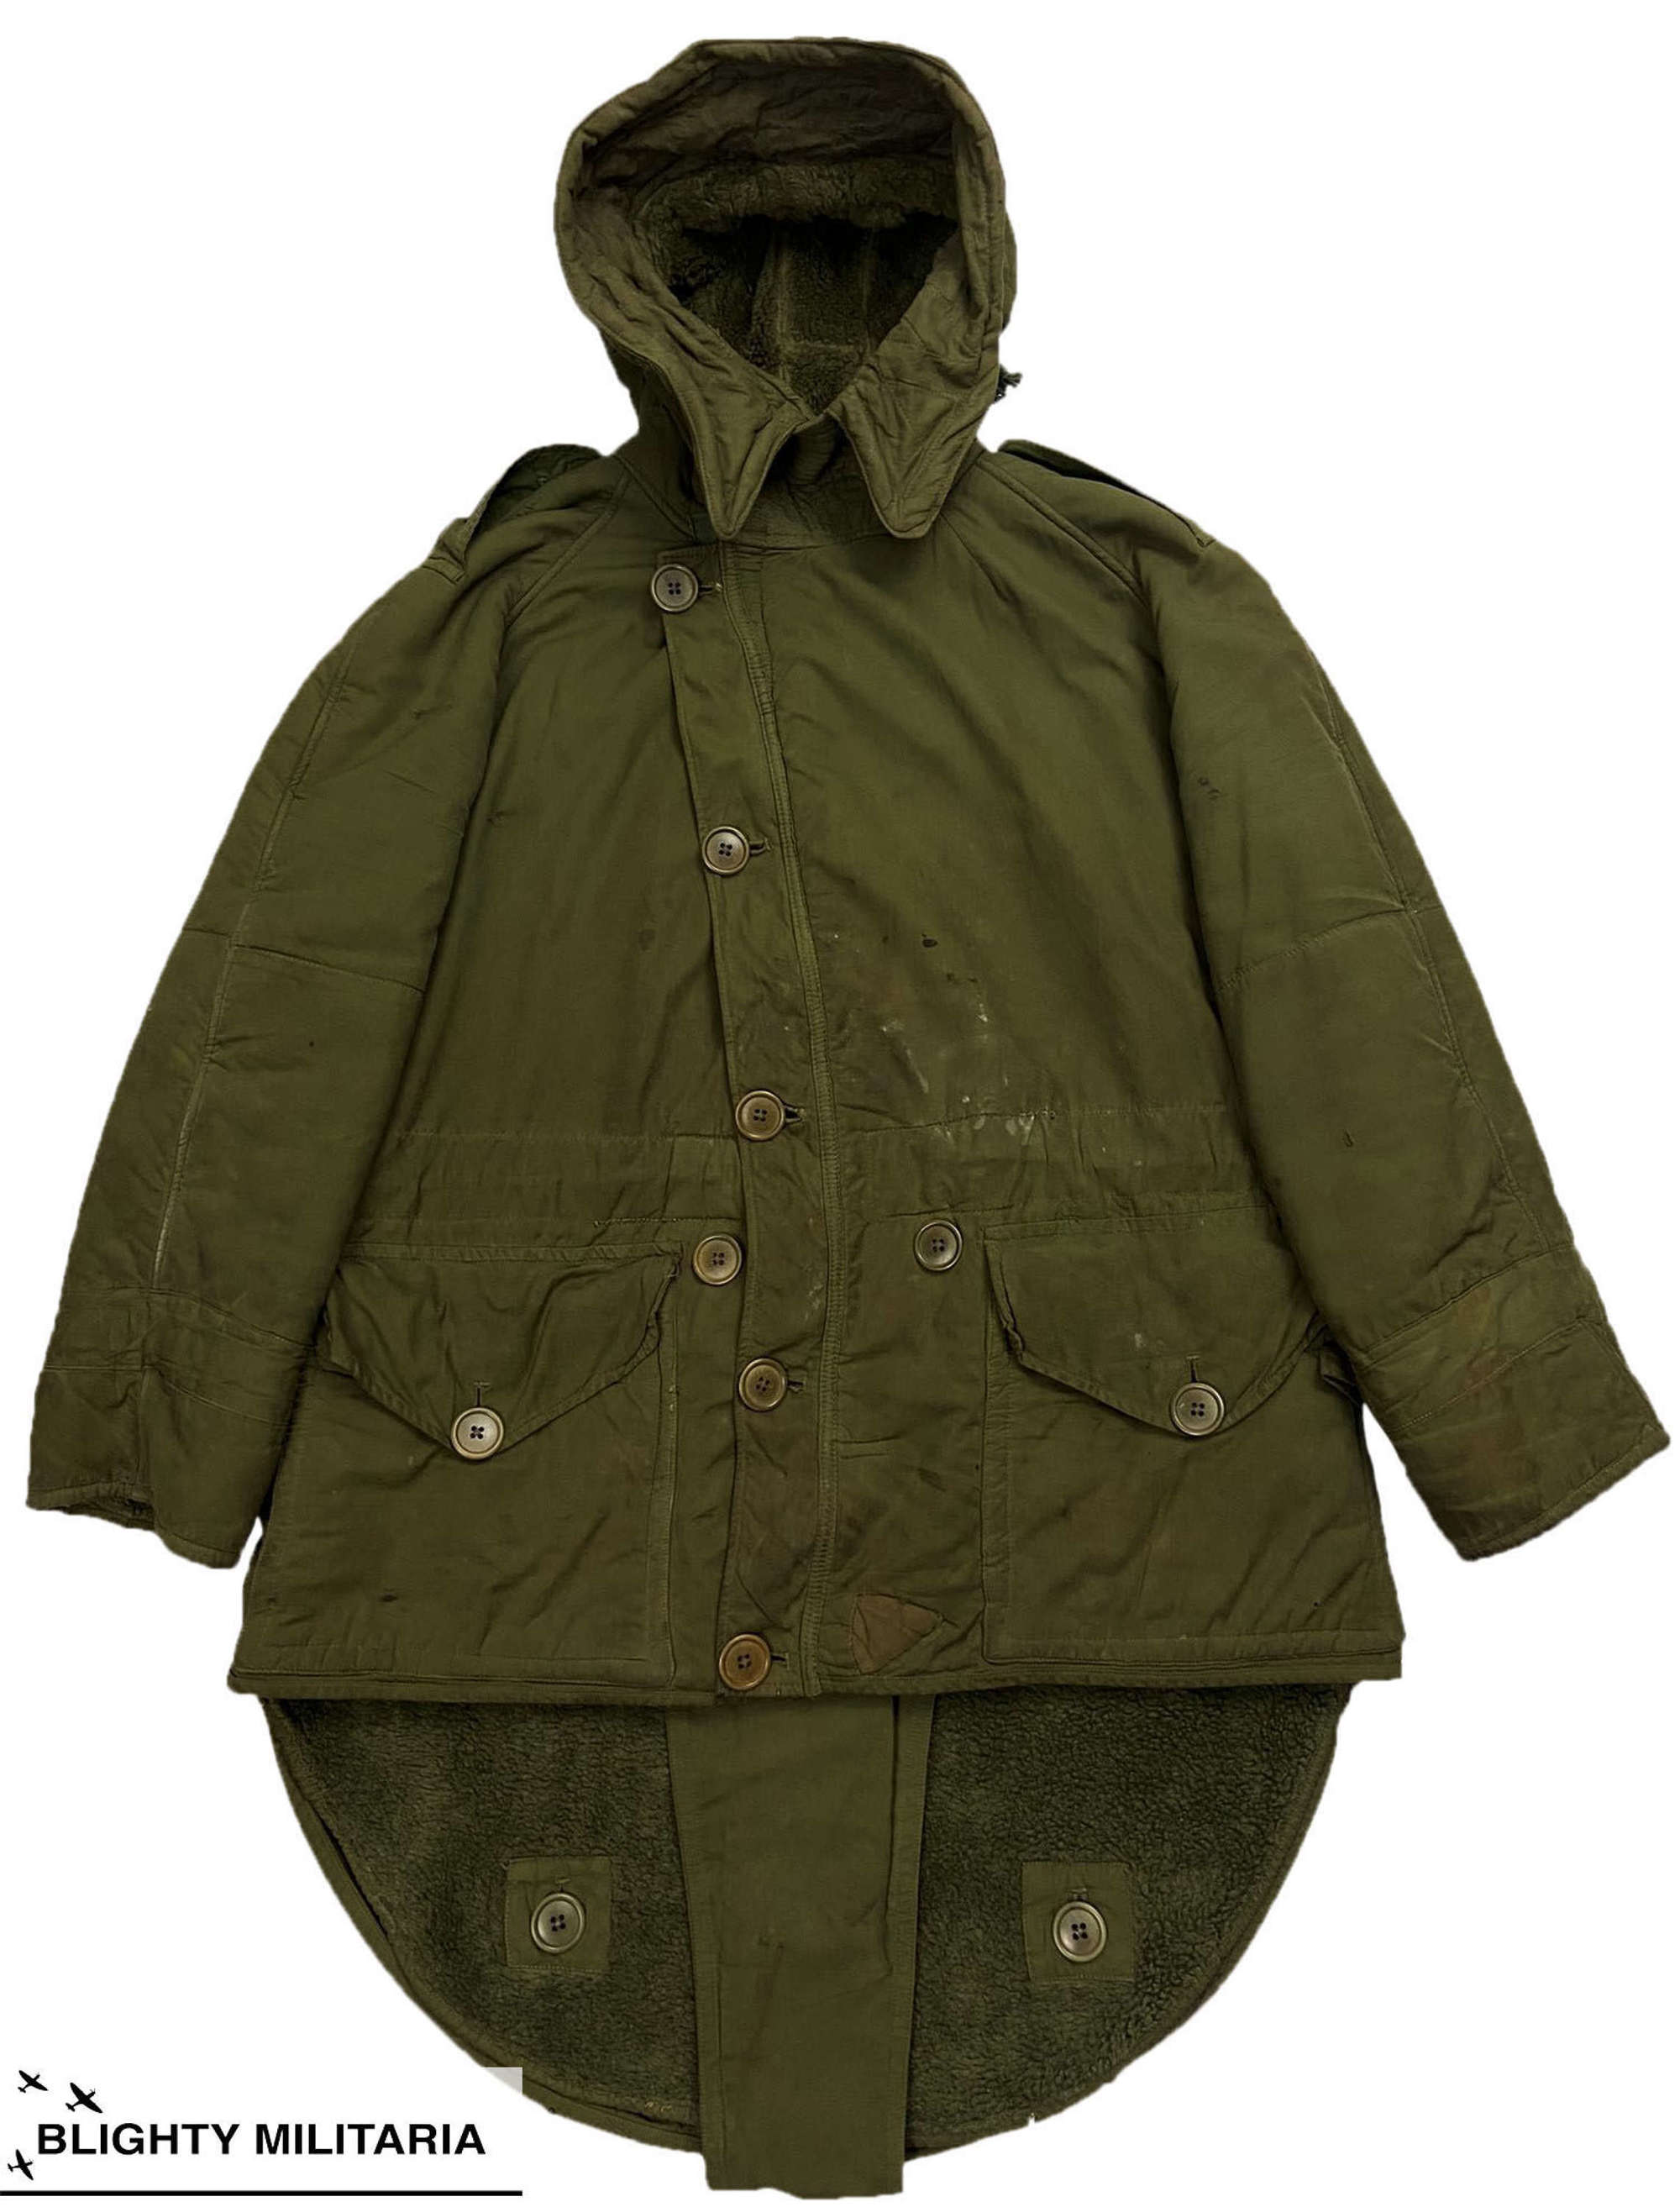 Scarce Original Early 1950s British Army First Pattern Middle Parka